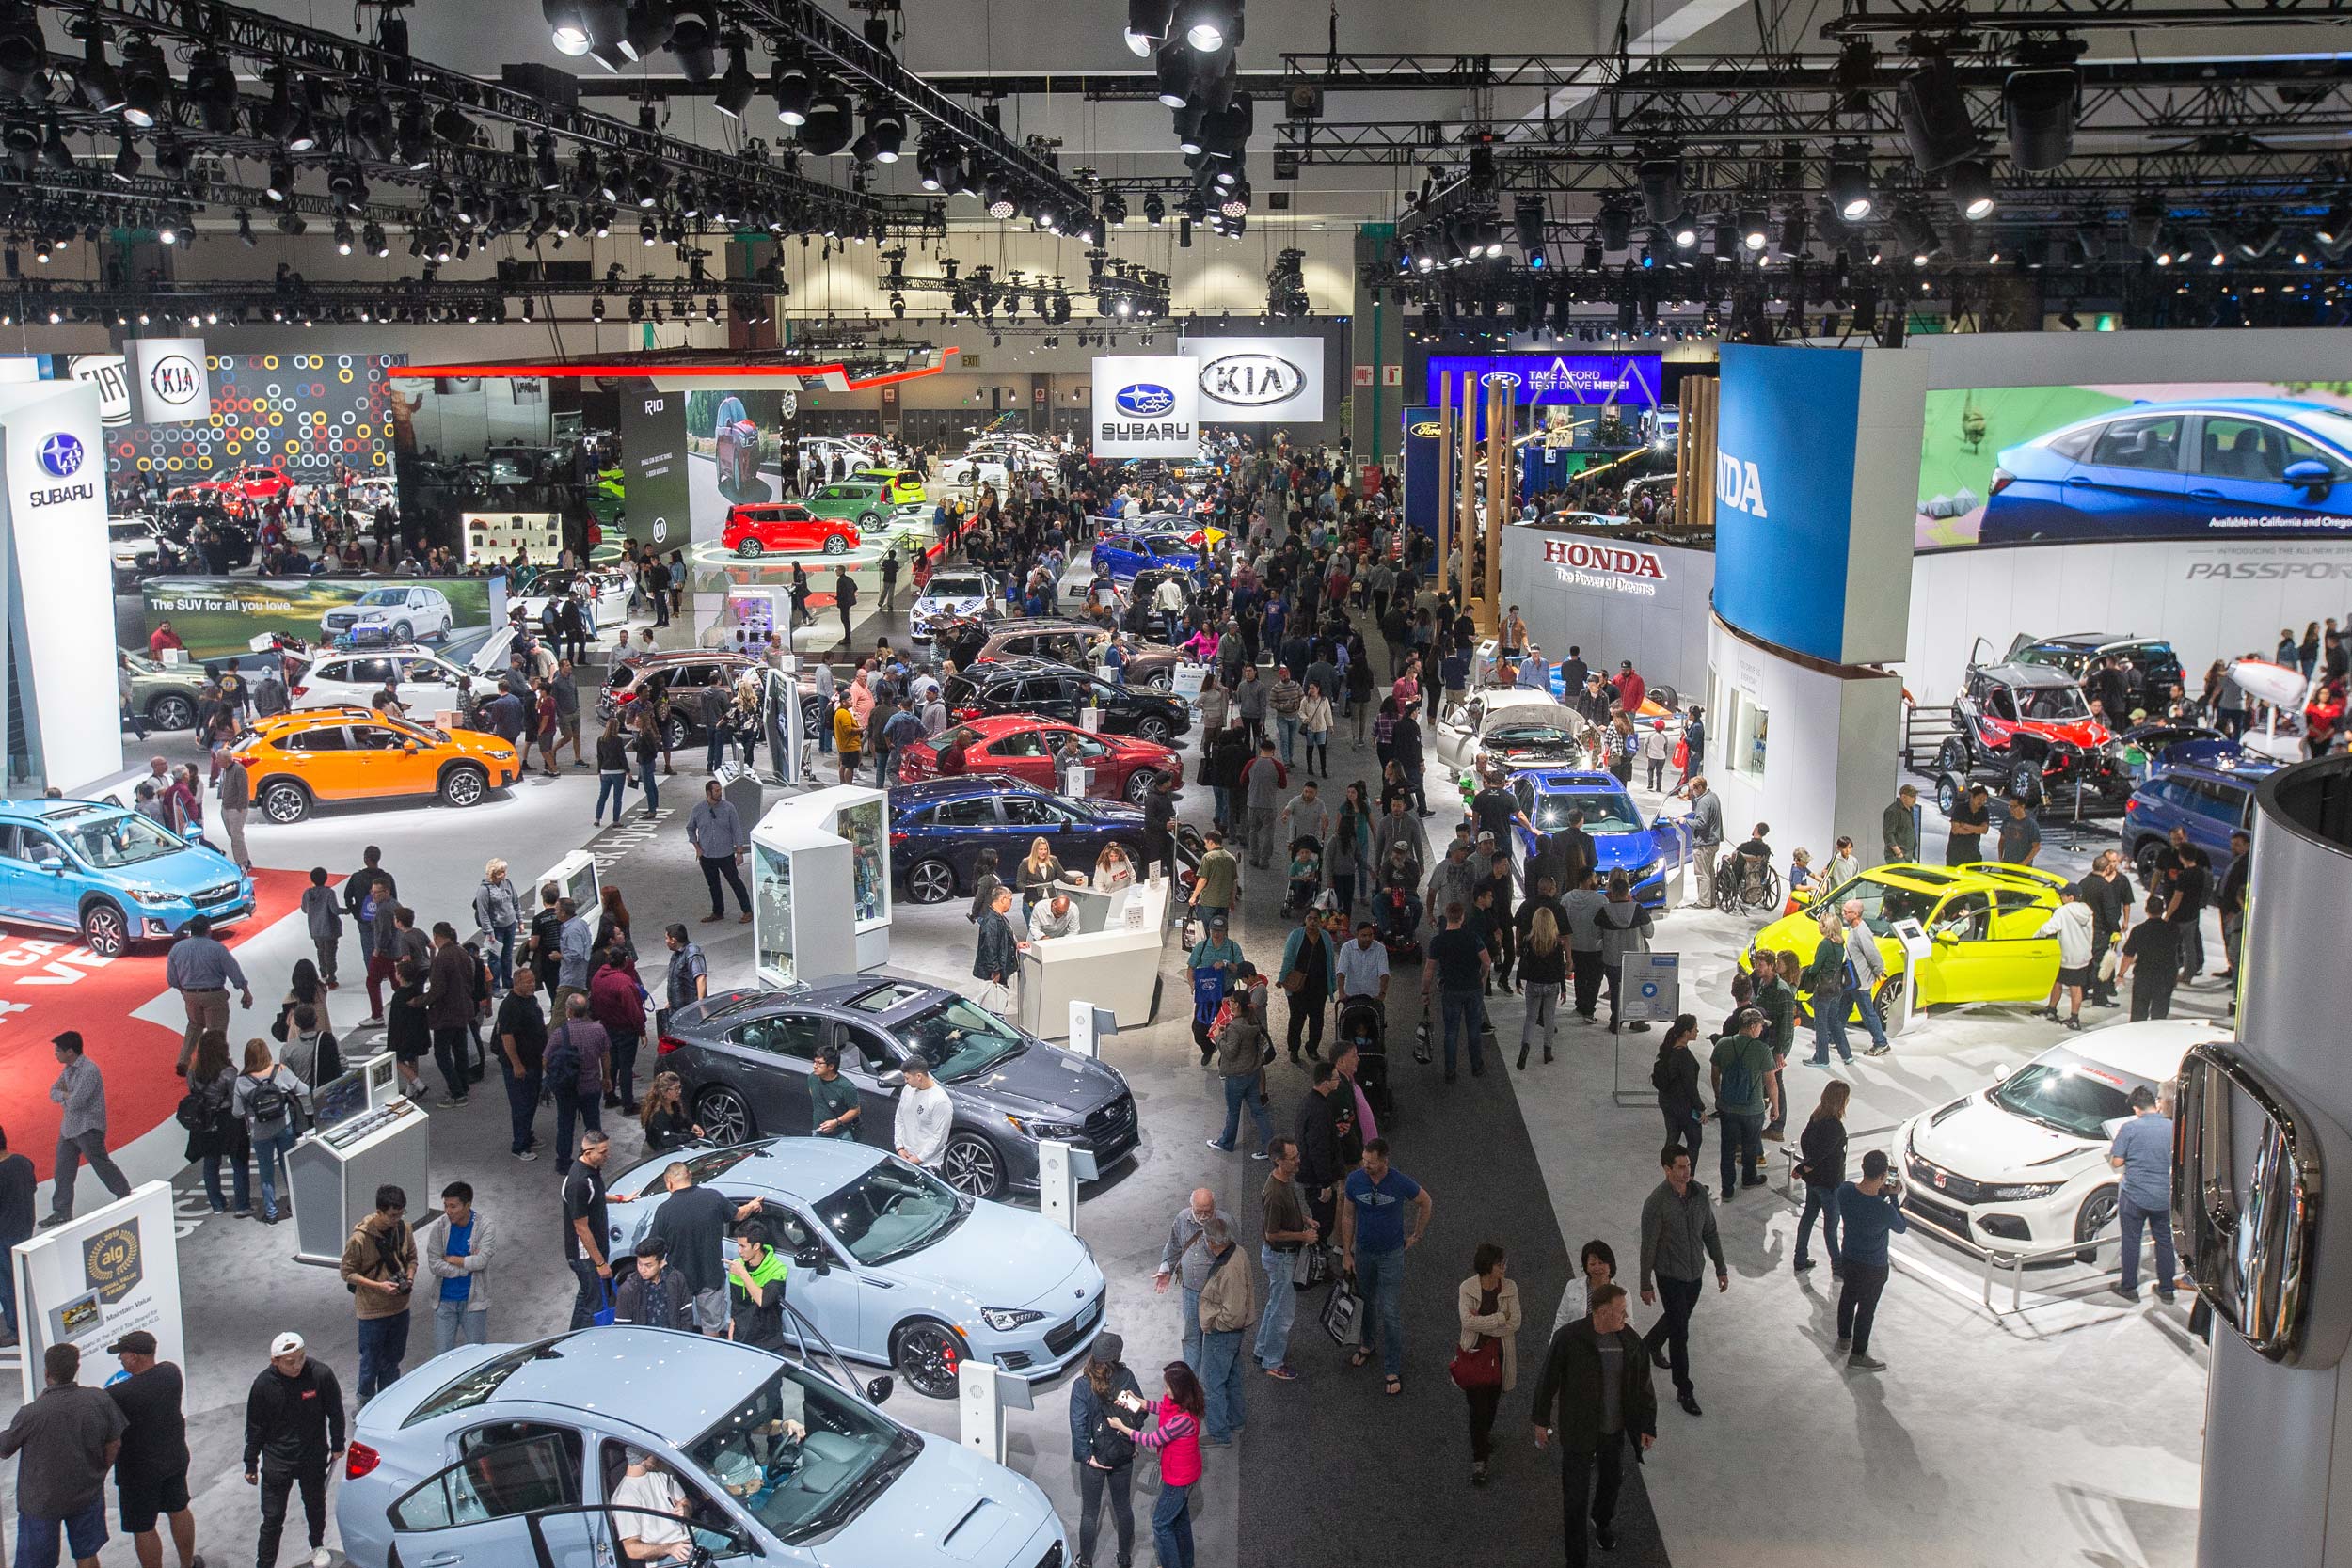 LA Auto Show Returns With Most Diverse Range Of Vehicles And Brands At